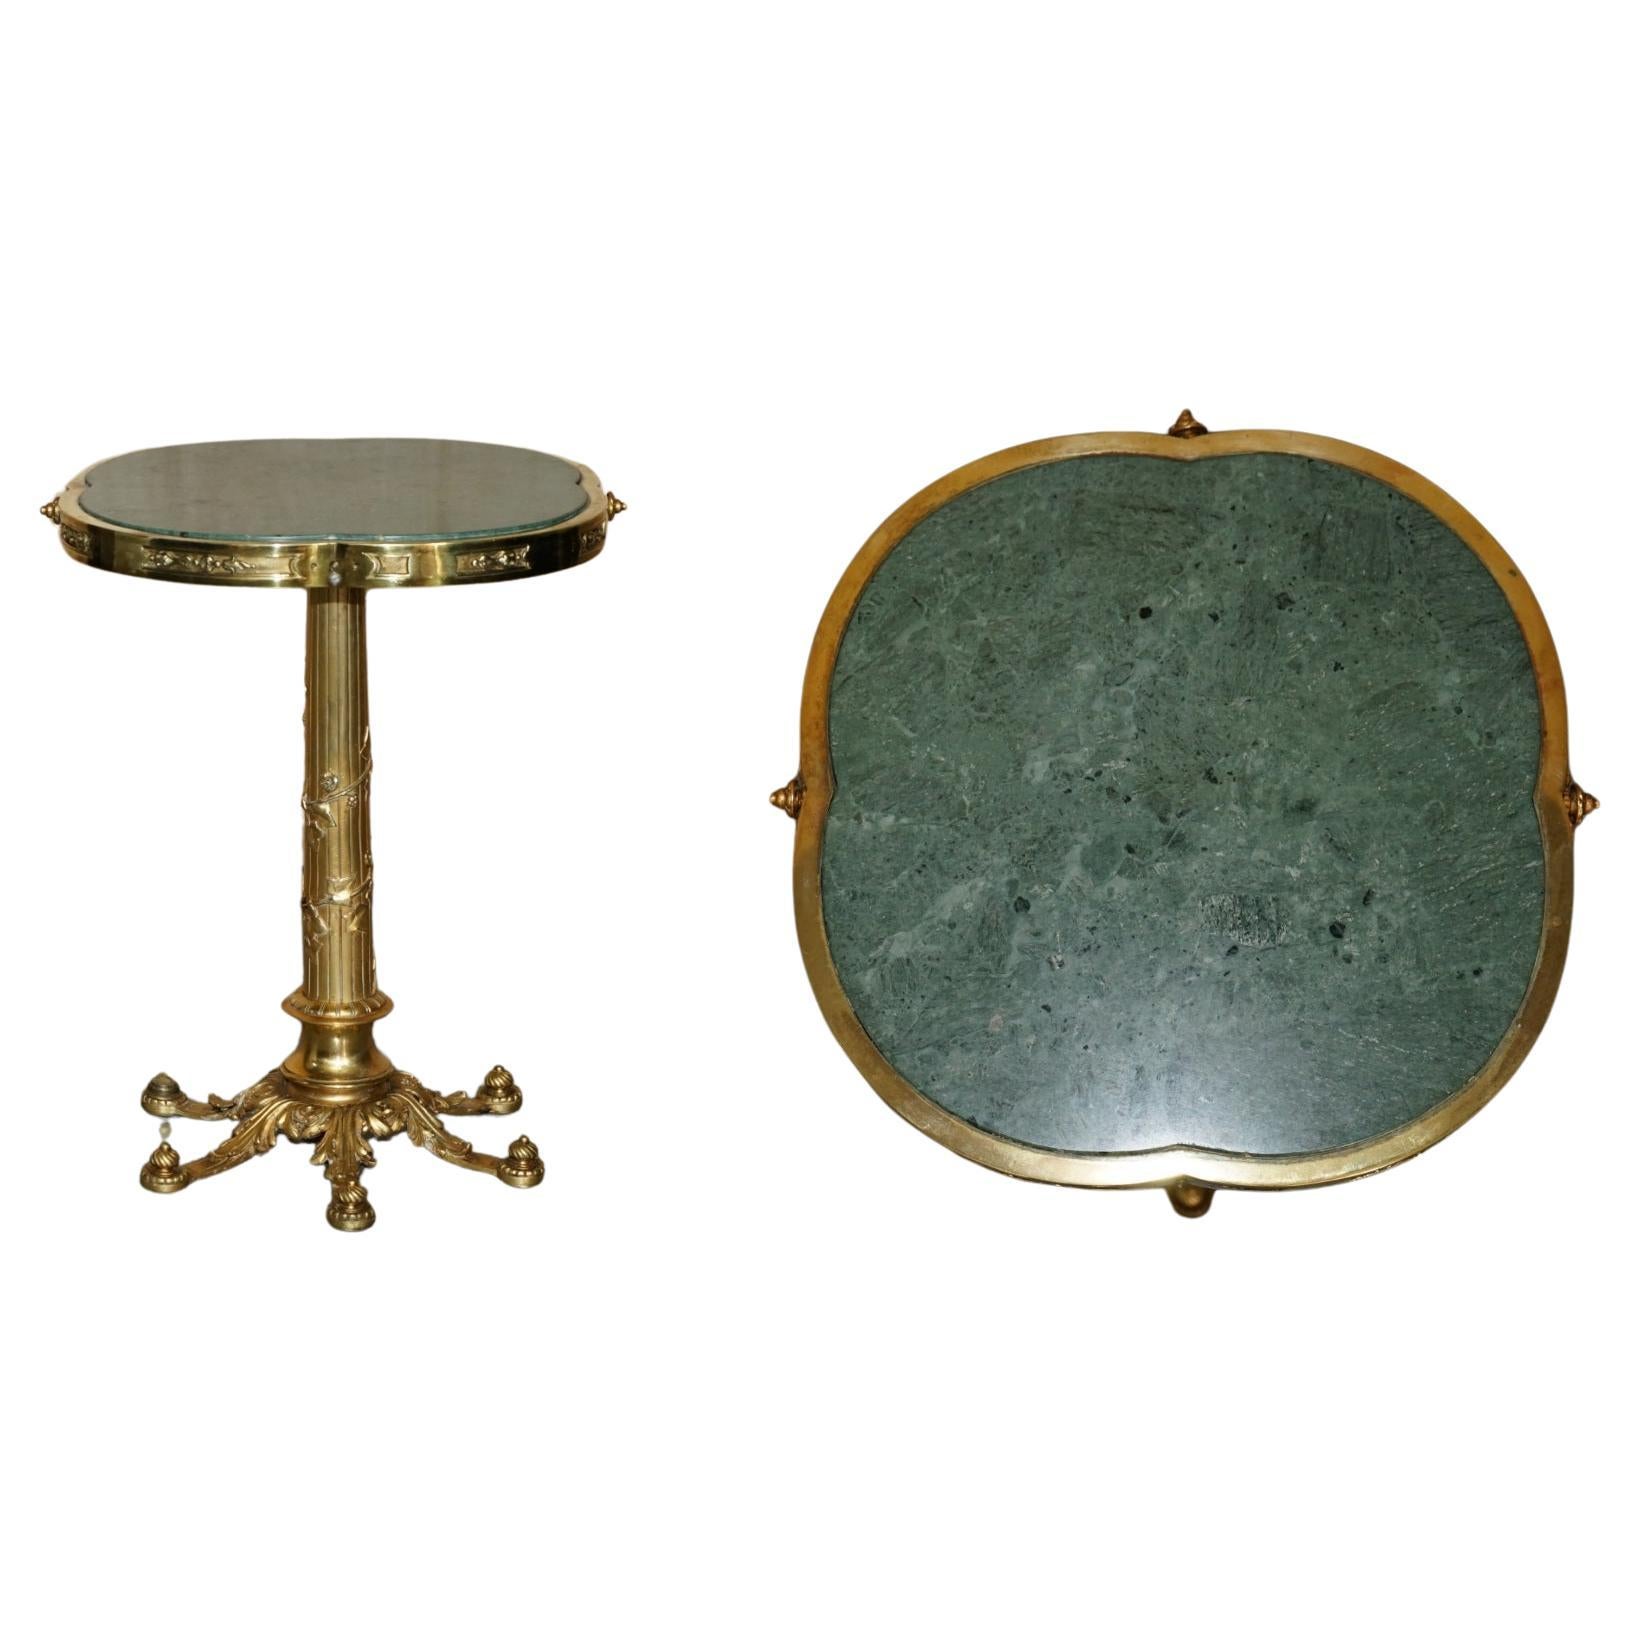 EXQUISITE ANTIQUE CIRCA 1900 BRASS SiDE END LAMP TABLE WITH THICK MARBLE TOP For Sale